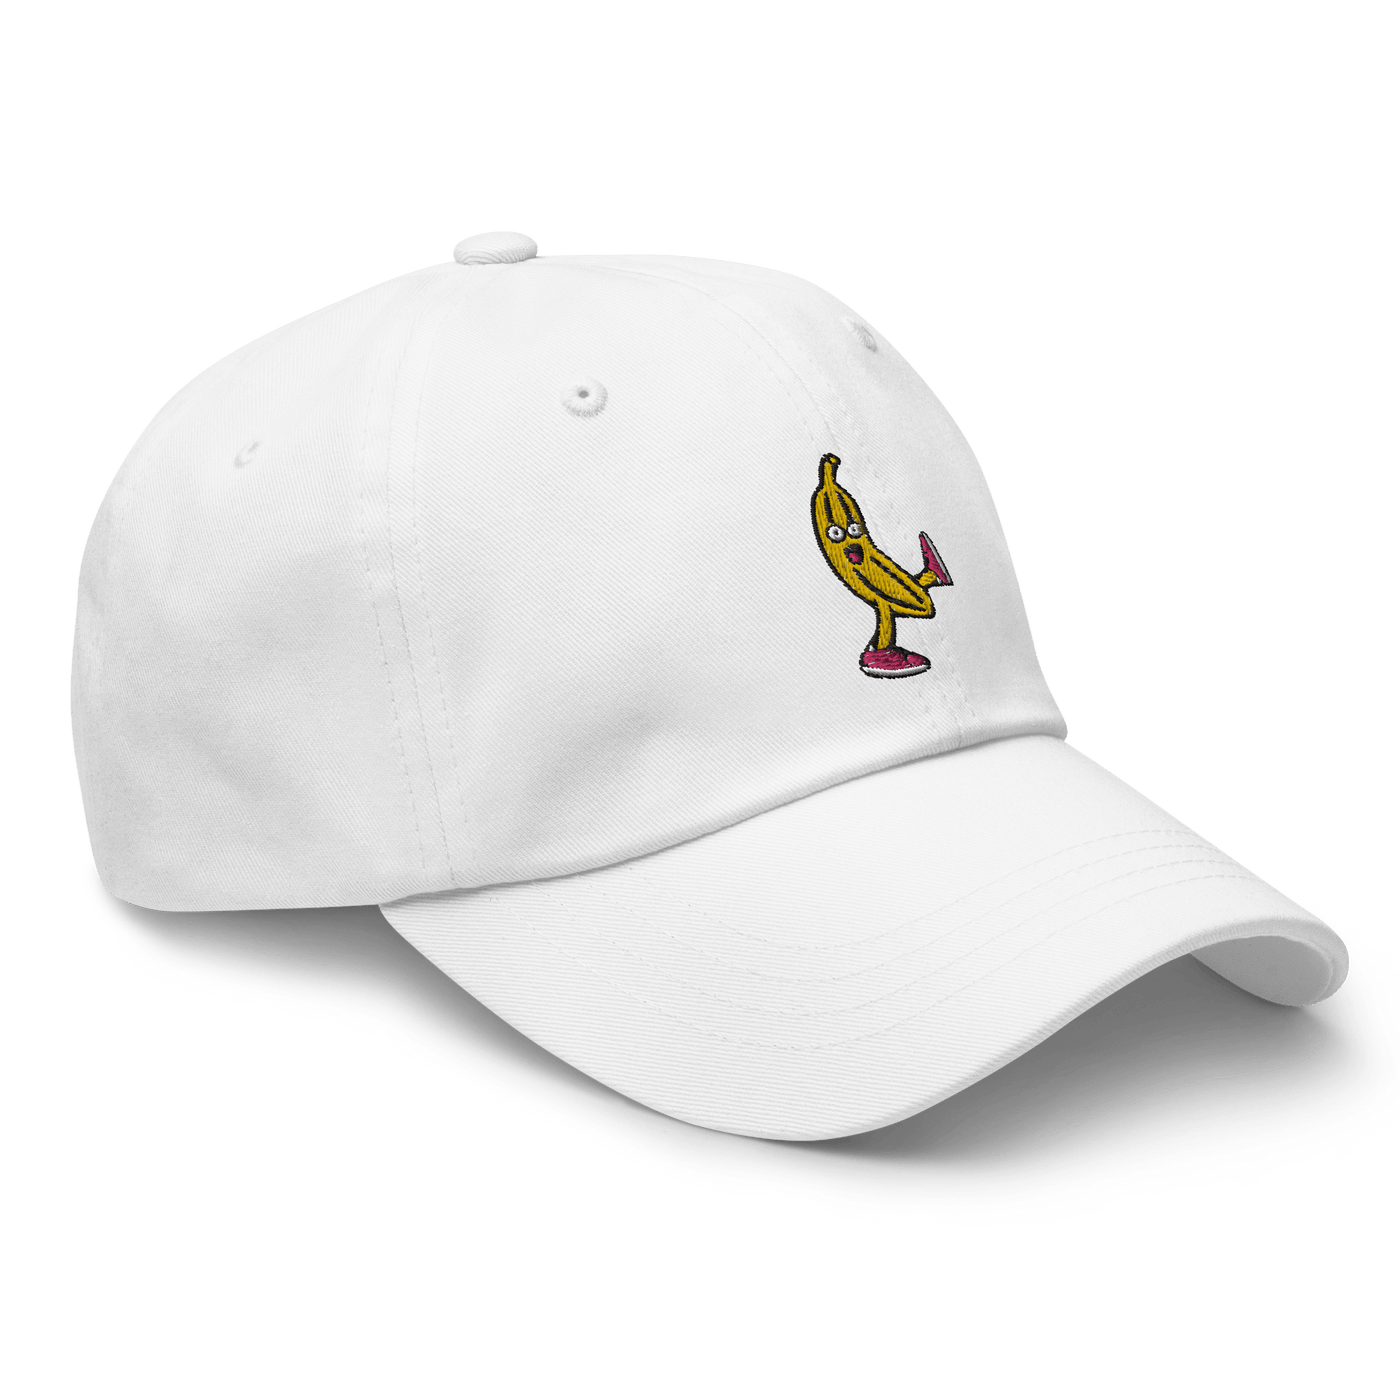 Drunk Banana Dad hat - White - - Just Another Cap Store